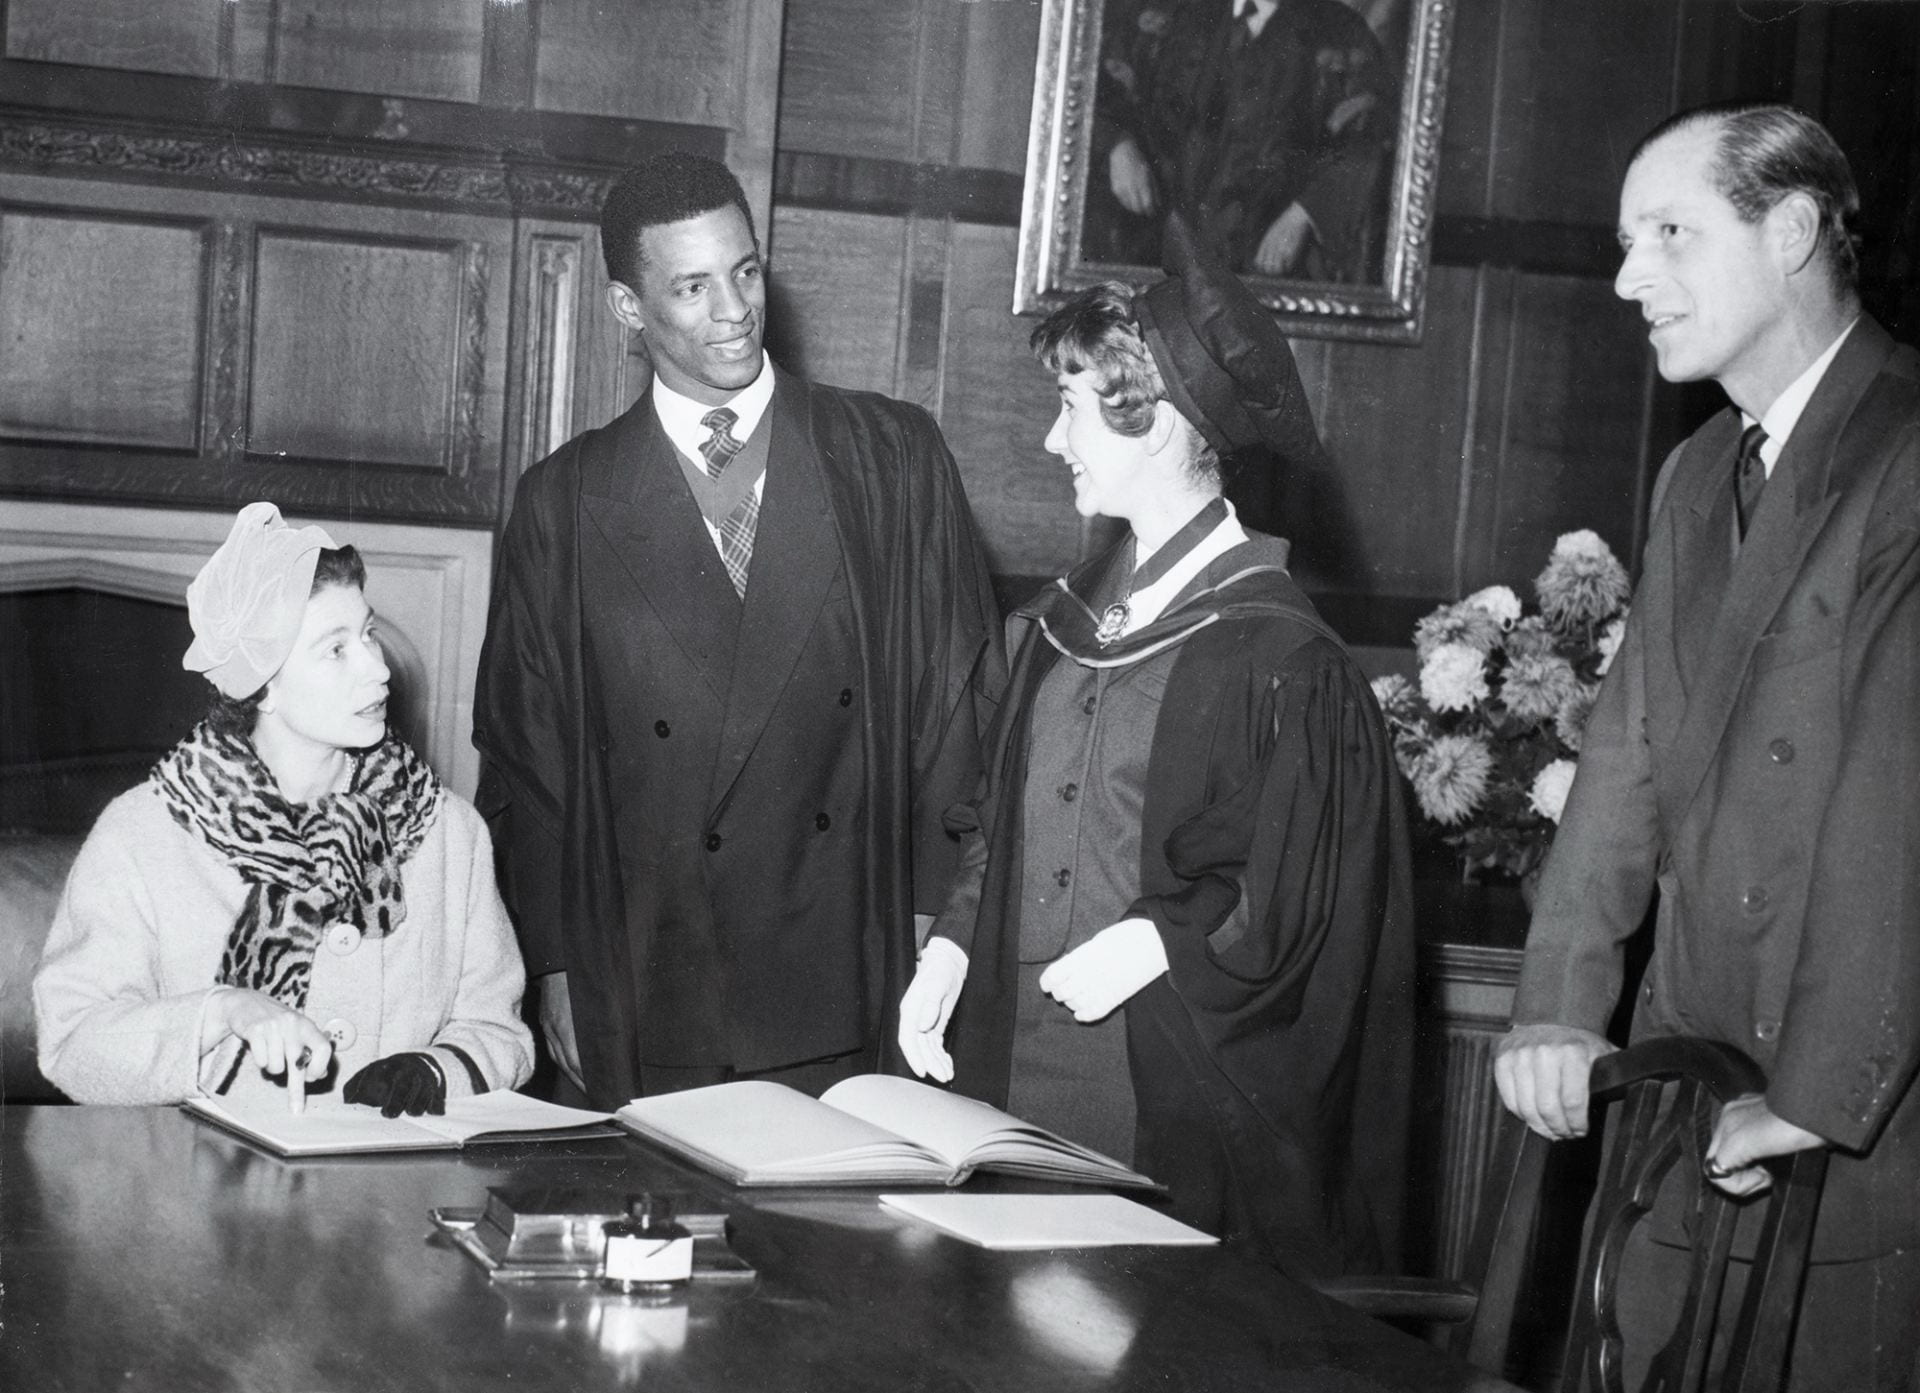 George Odlum stood in conversation with a fellow student (both wearing formal gowns) and Prince Andrew, Queen Elizabeth II is seated at the table beside Odlum.